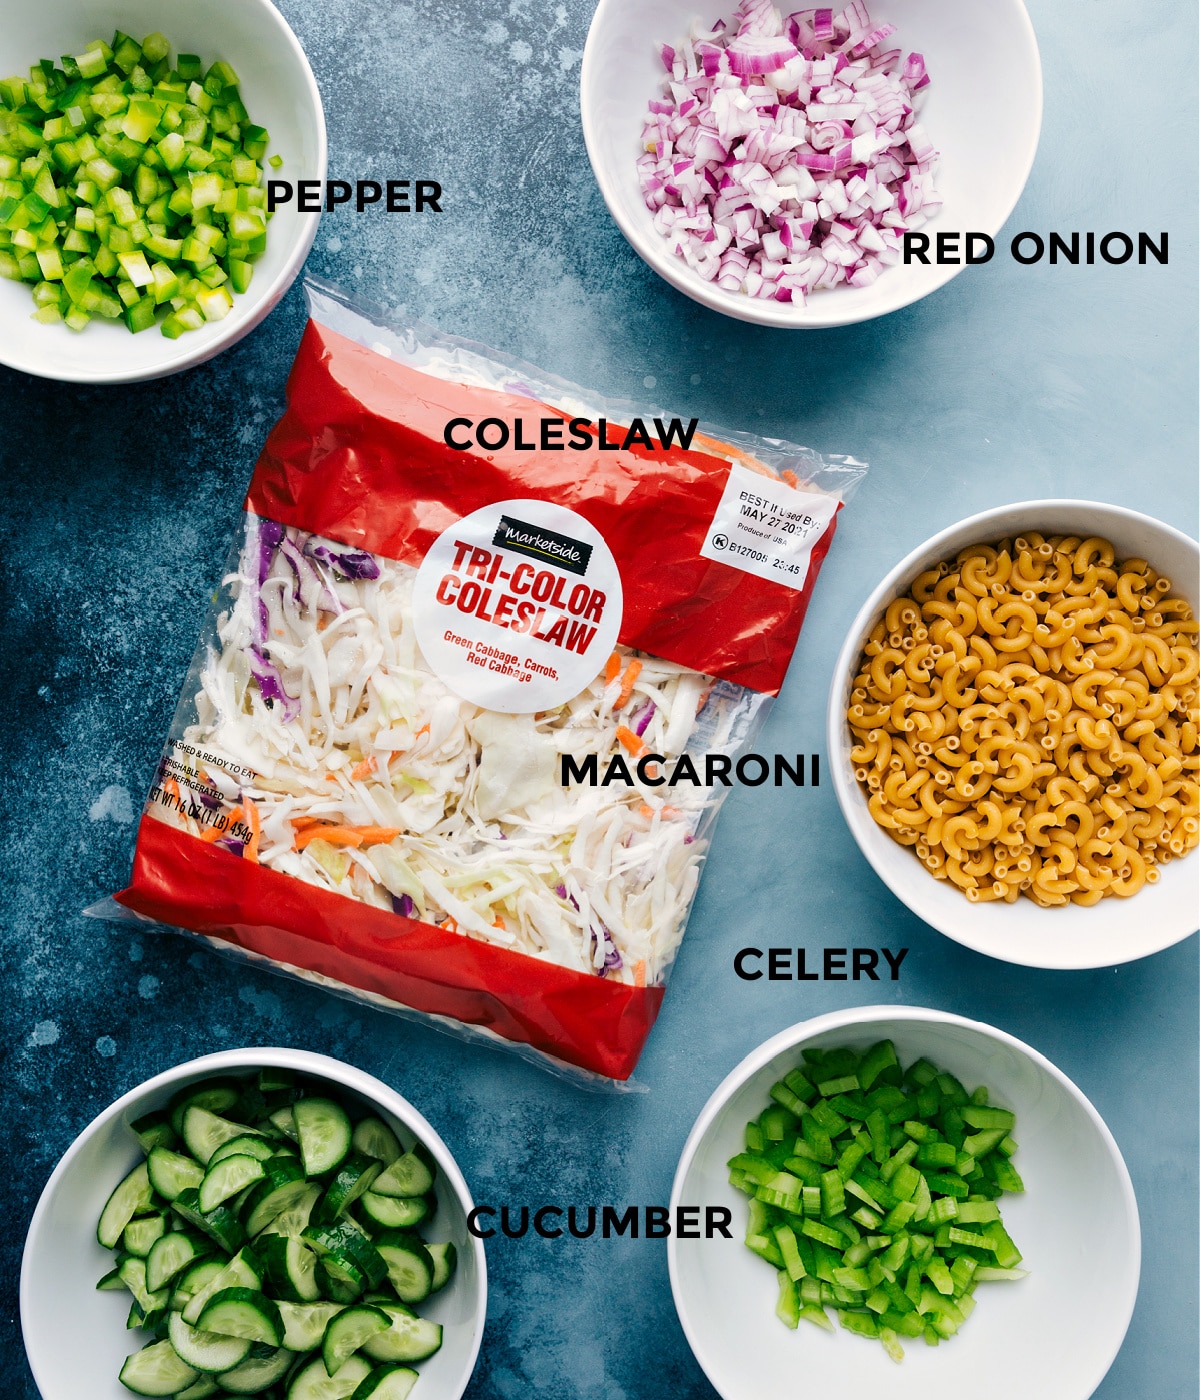 All the ingredients in this recipe prepped out for easy assembly.